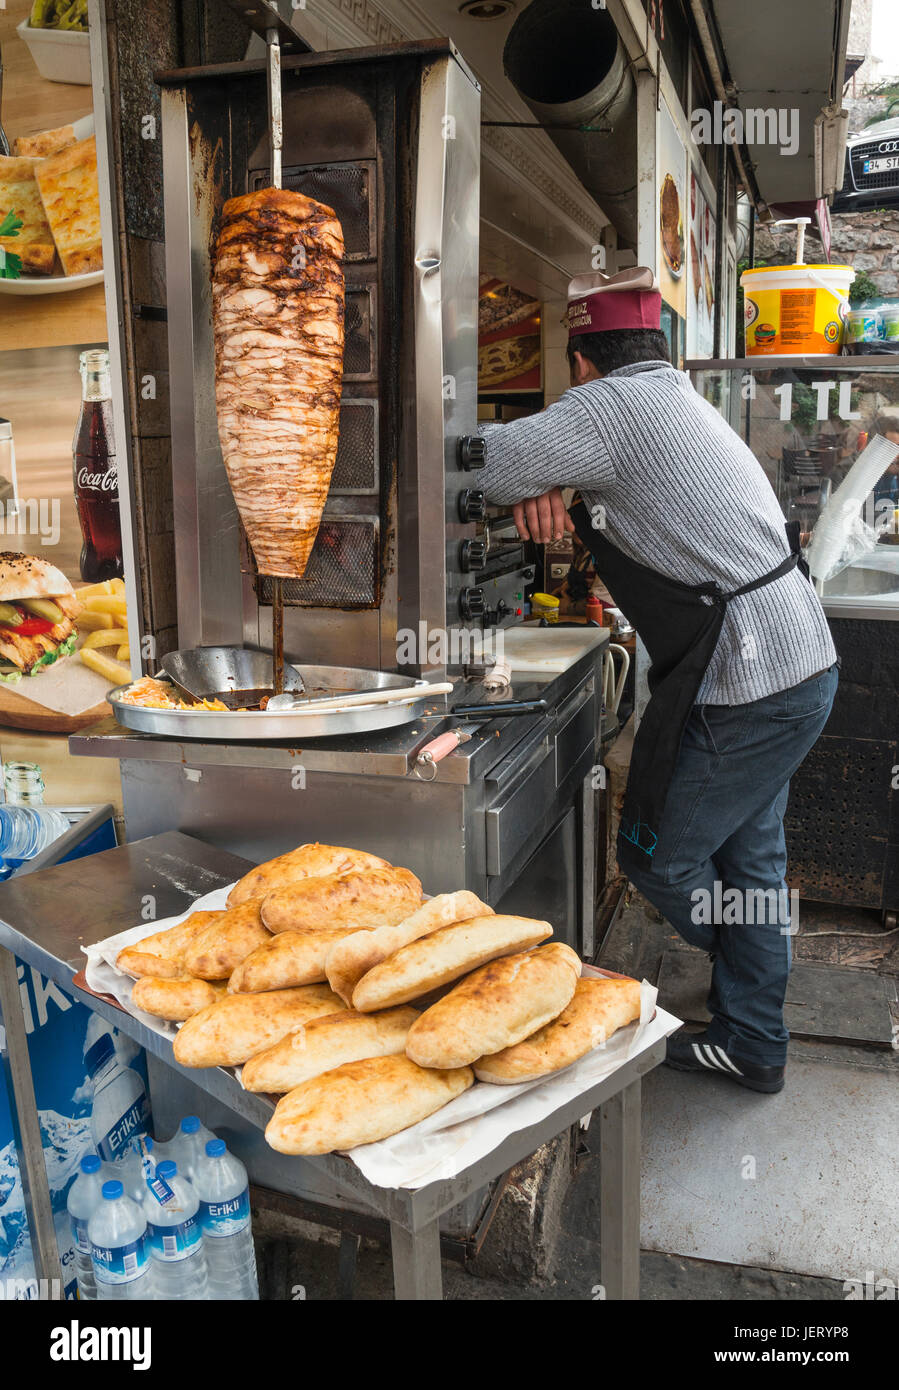 City Kebab High Resolution Stock Photography and Images - Alamy